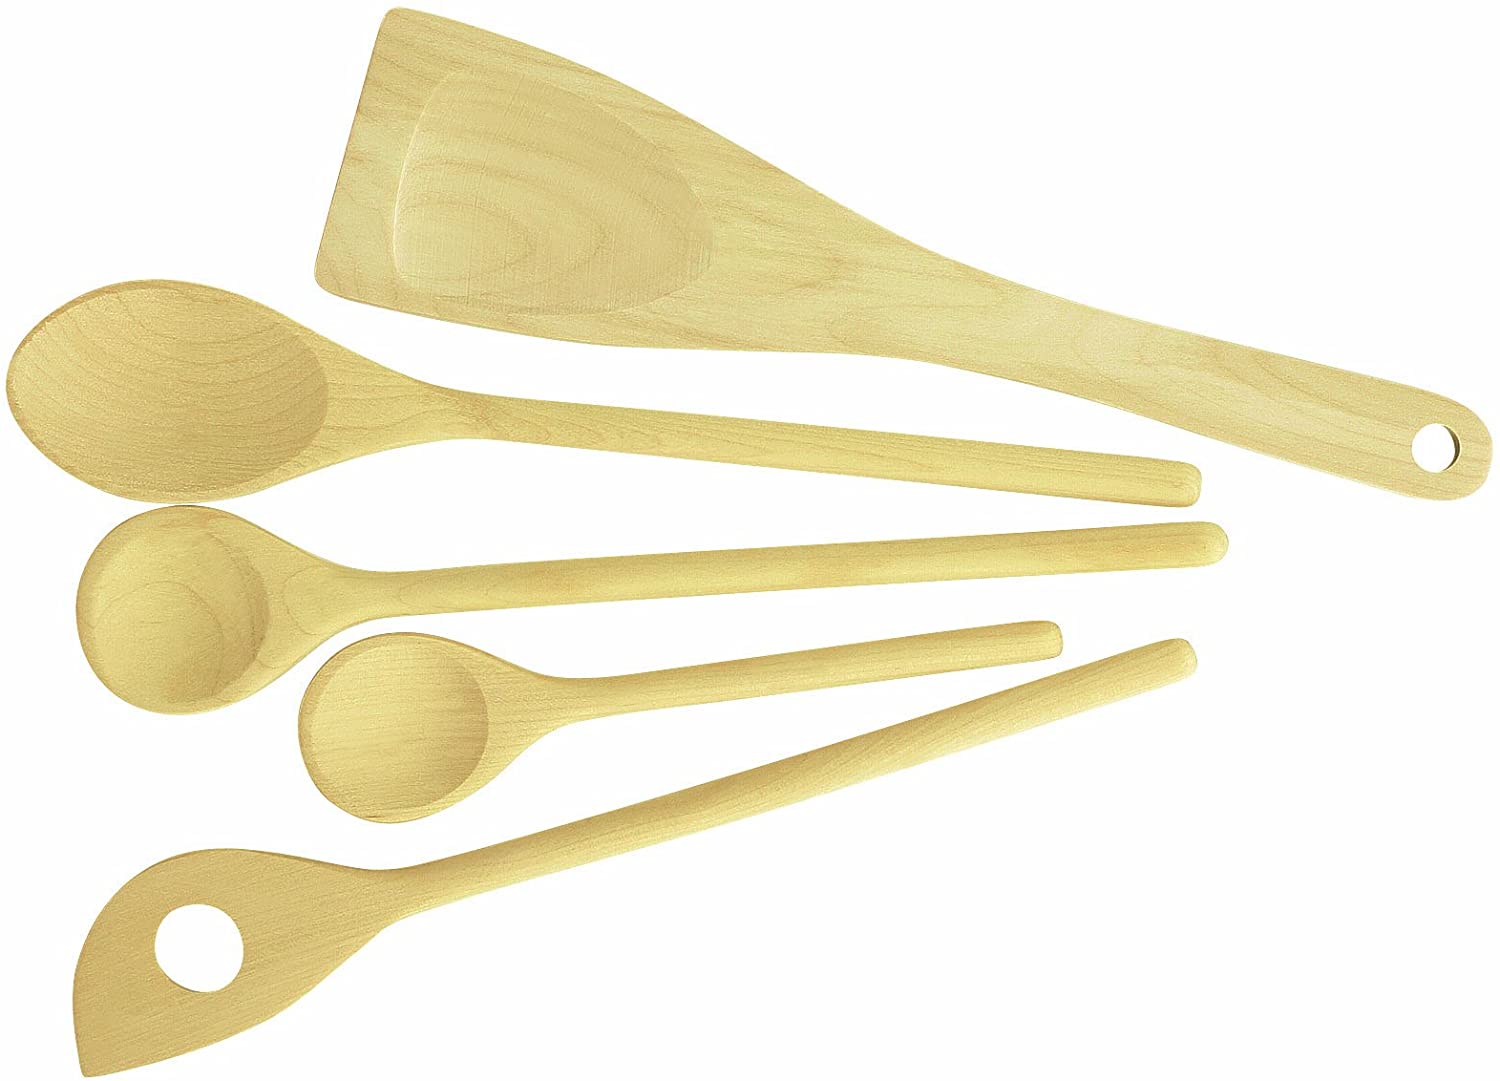 Tescoma Woody Cooking Spoons and Turner, Set of 5